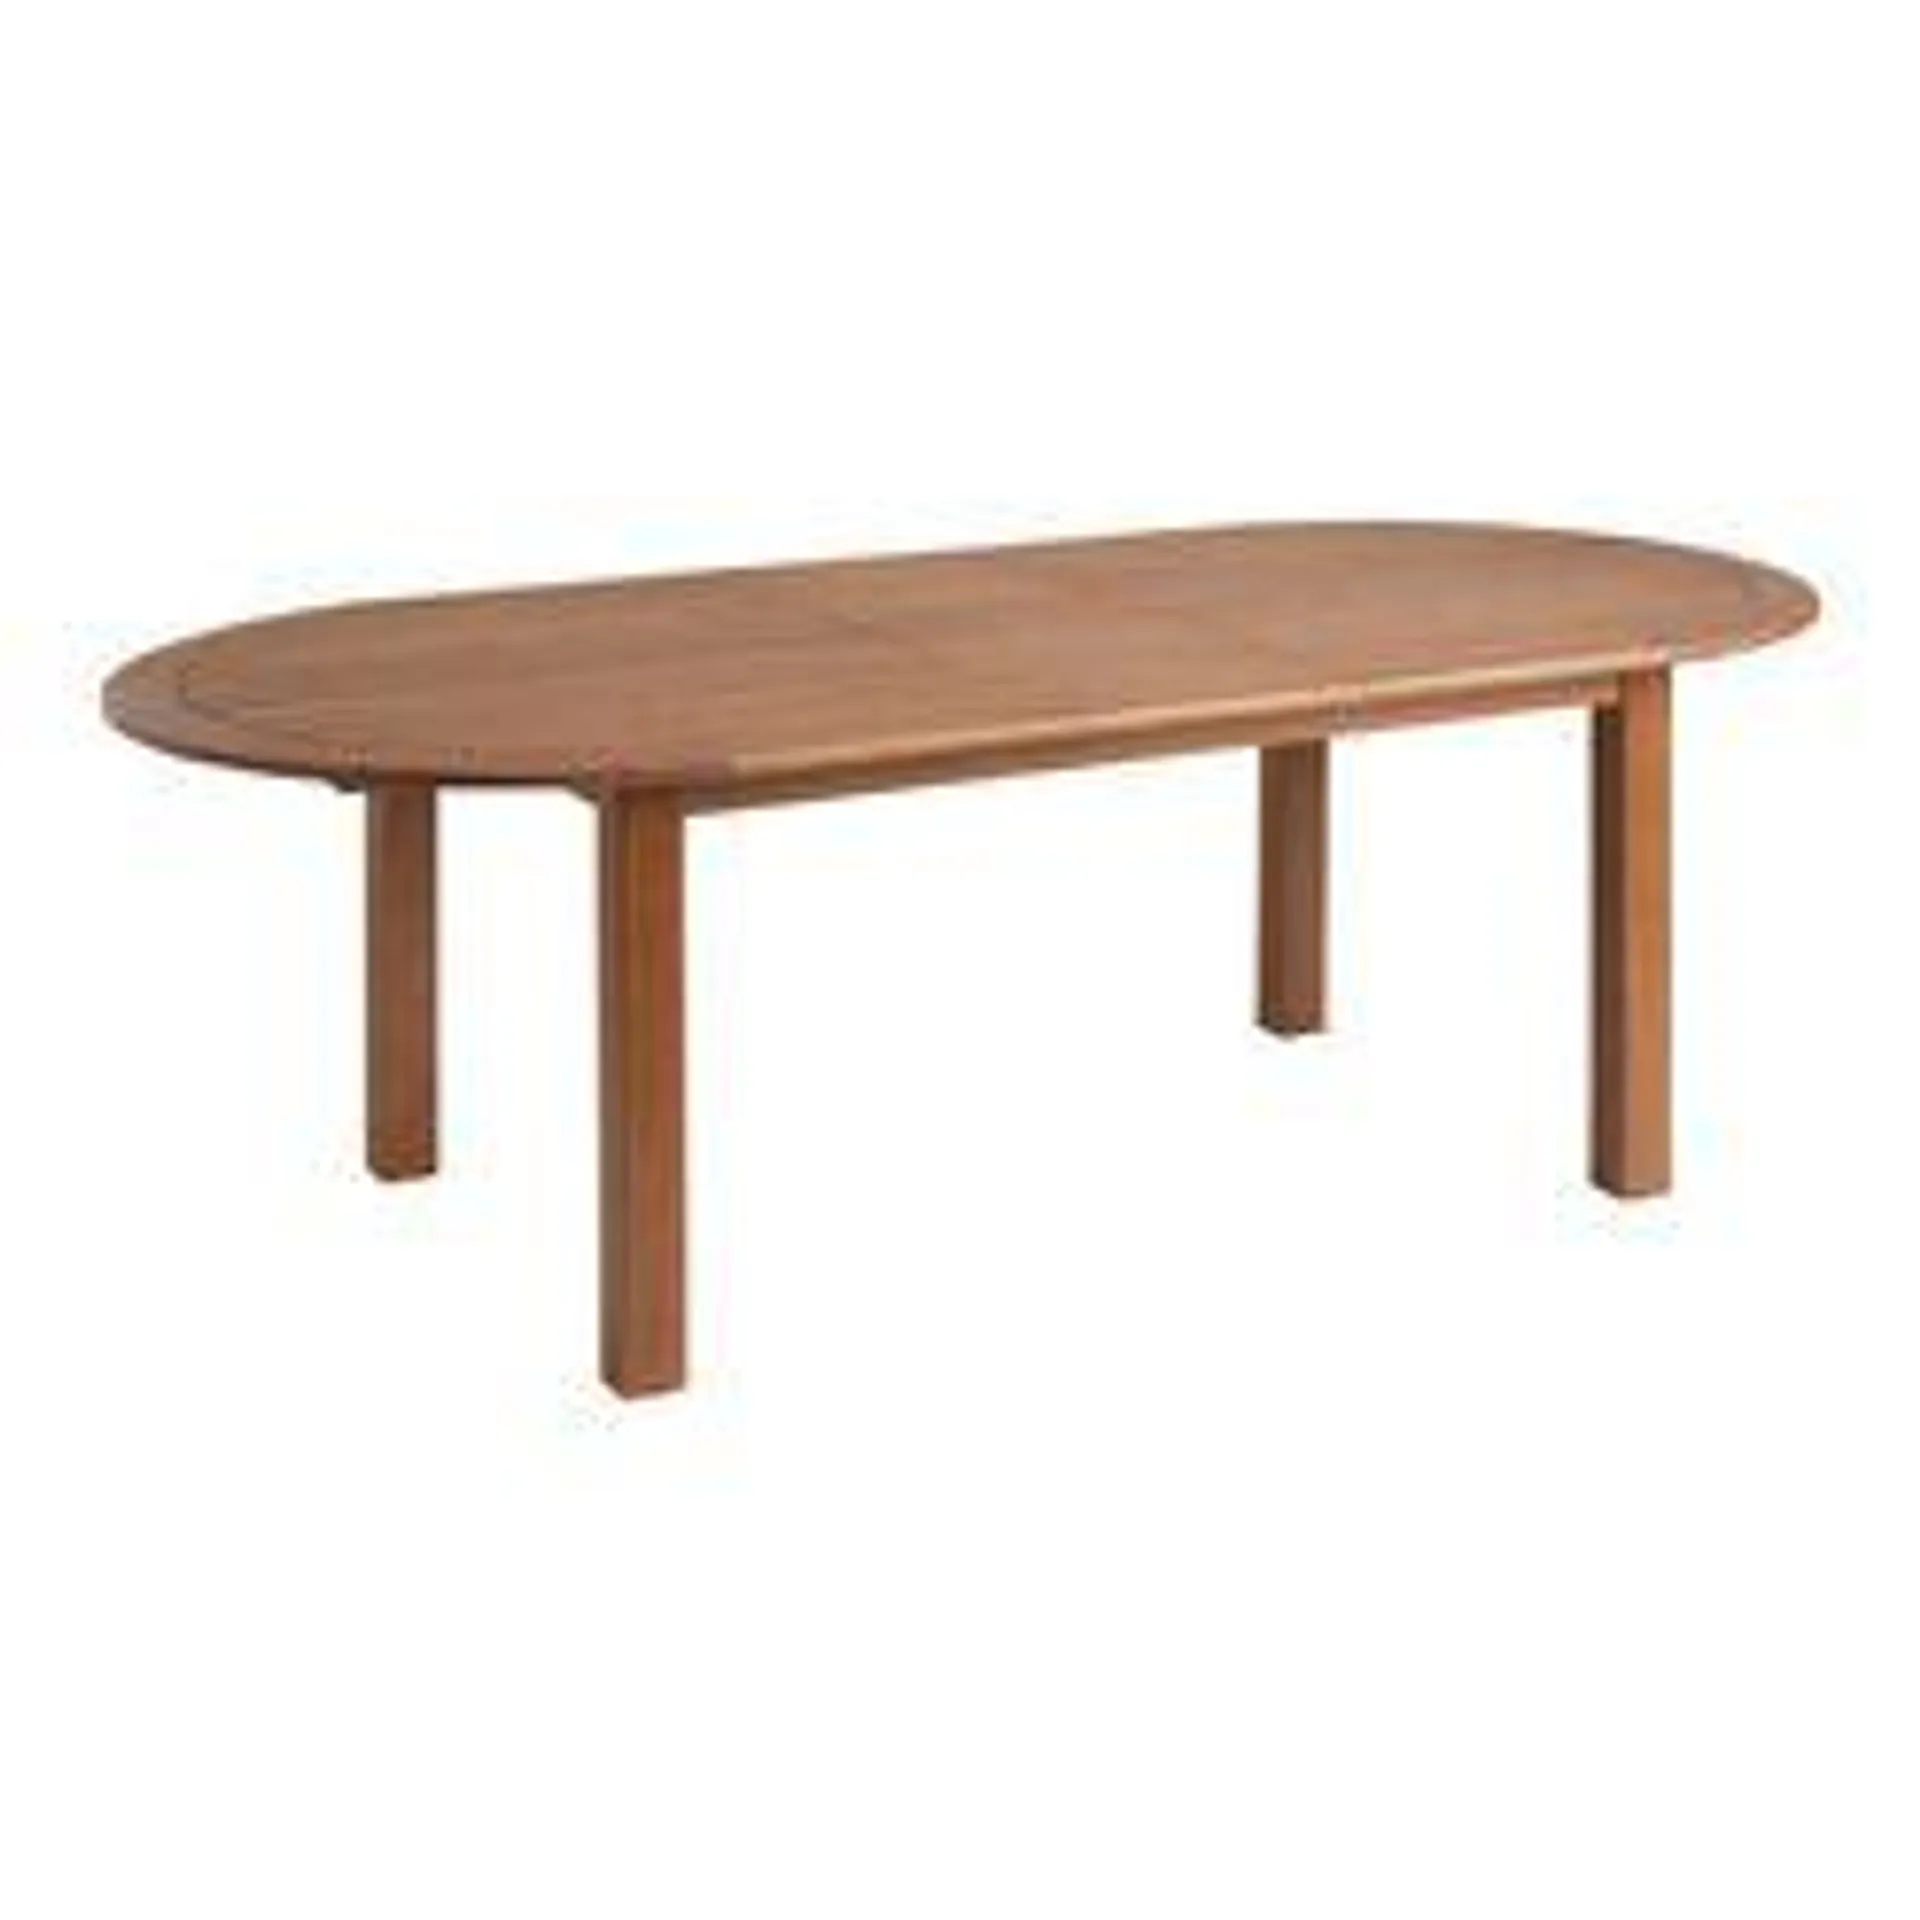 Mariposa Oval Eucalyptus Wood Outdoor Extension Dining Table